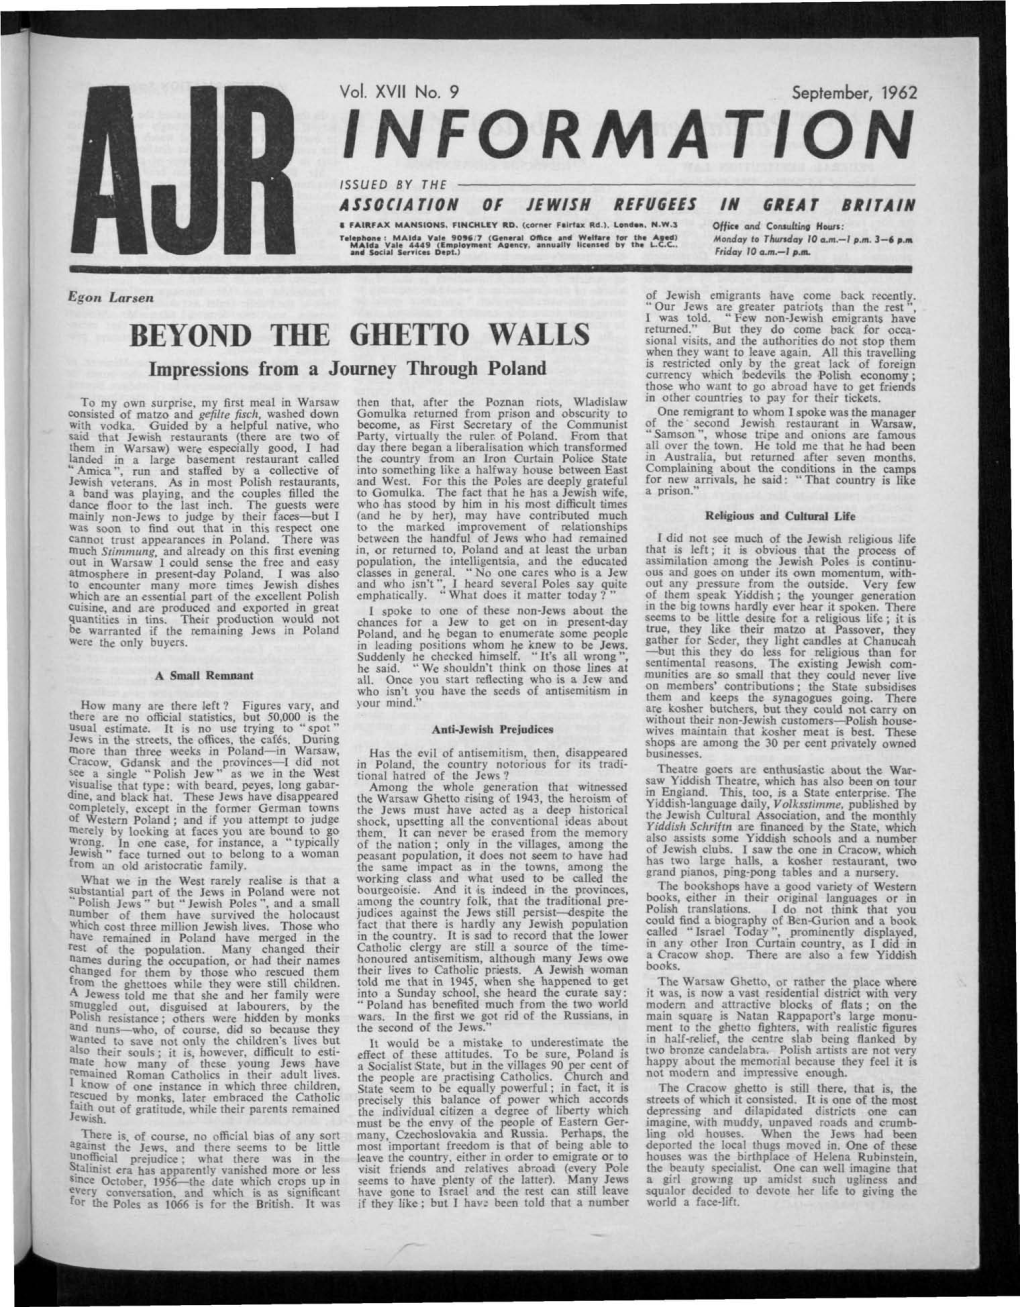 INFORMATION ISSUED by the - ASSOCIATION of JEWISH REFUGEES in GREAT BRITAIN I FAIRFAX MANSIONS, FINCHLEY RD, (Corner Falrflk Rd.)